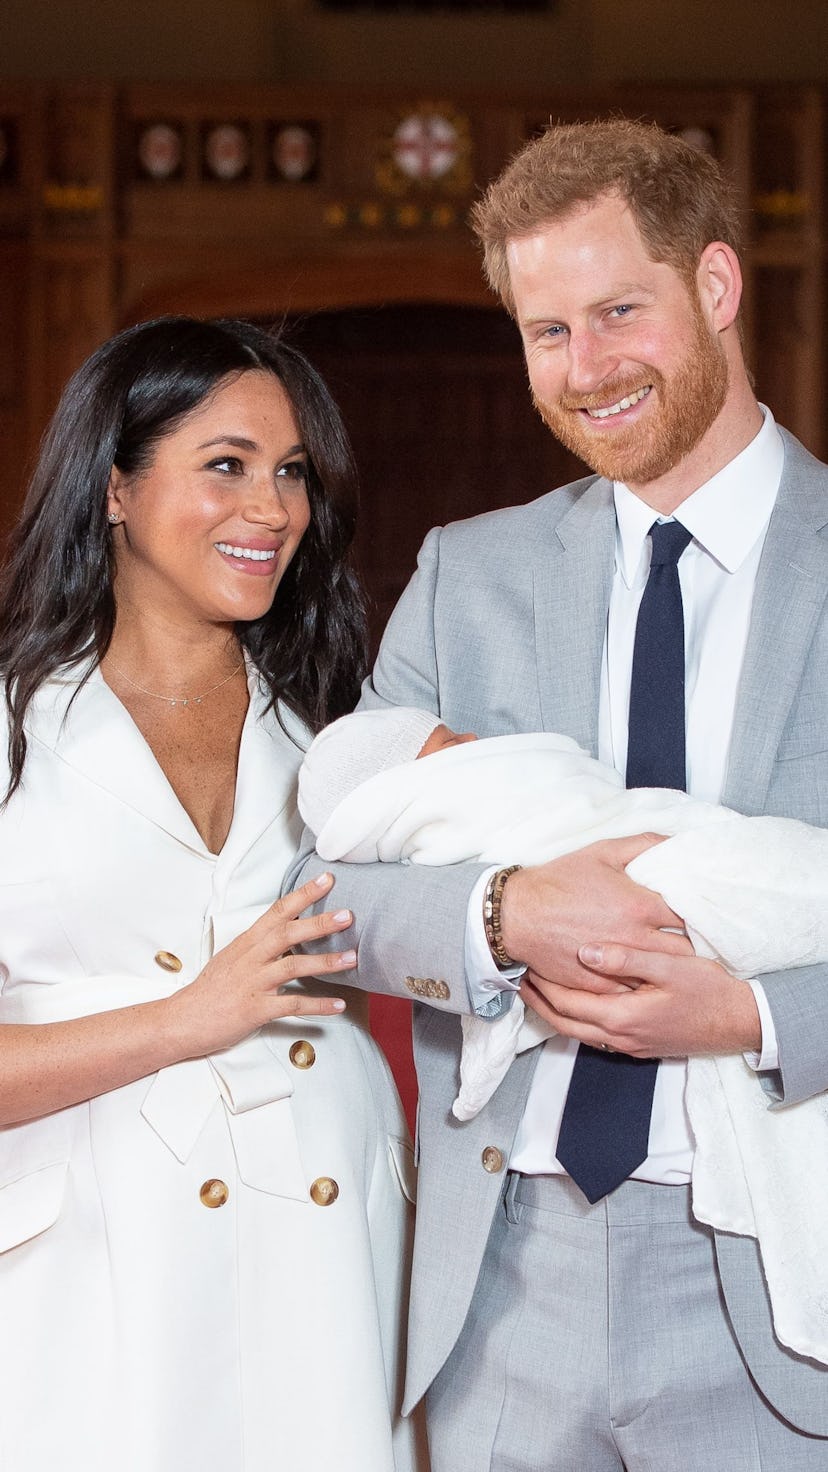 Since welcoming his son Archie, Prince Harry has spoken about how proud he is to be a dad.